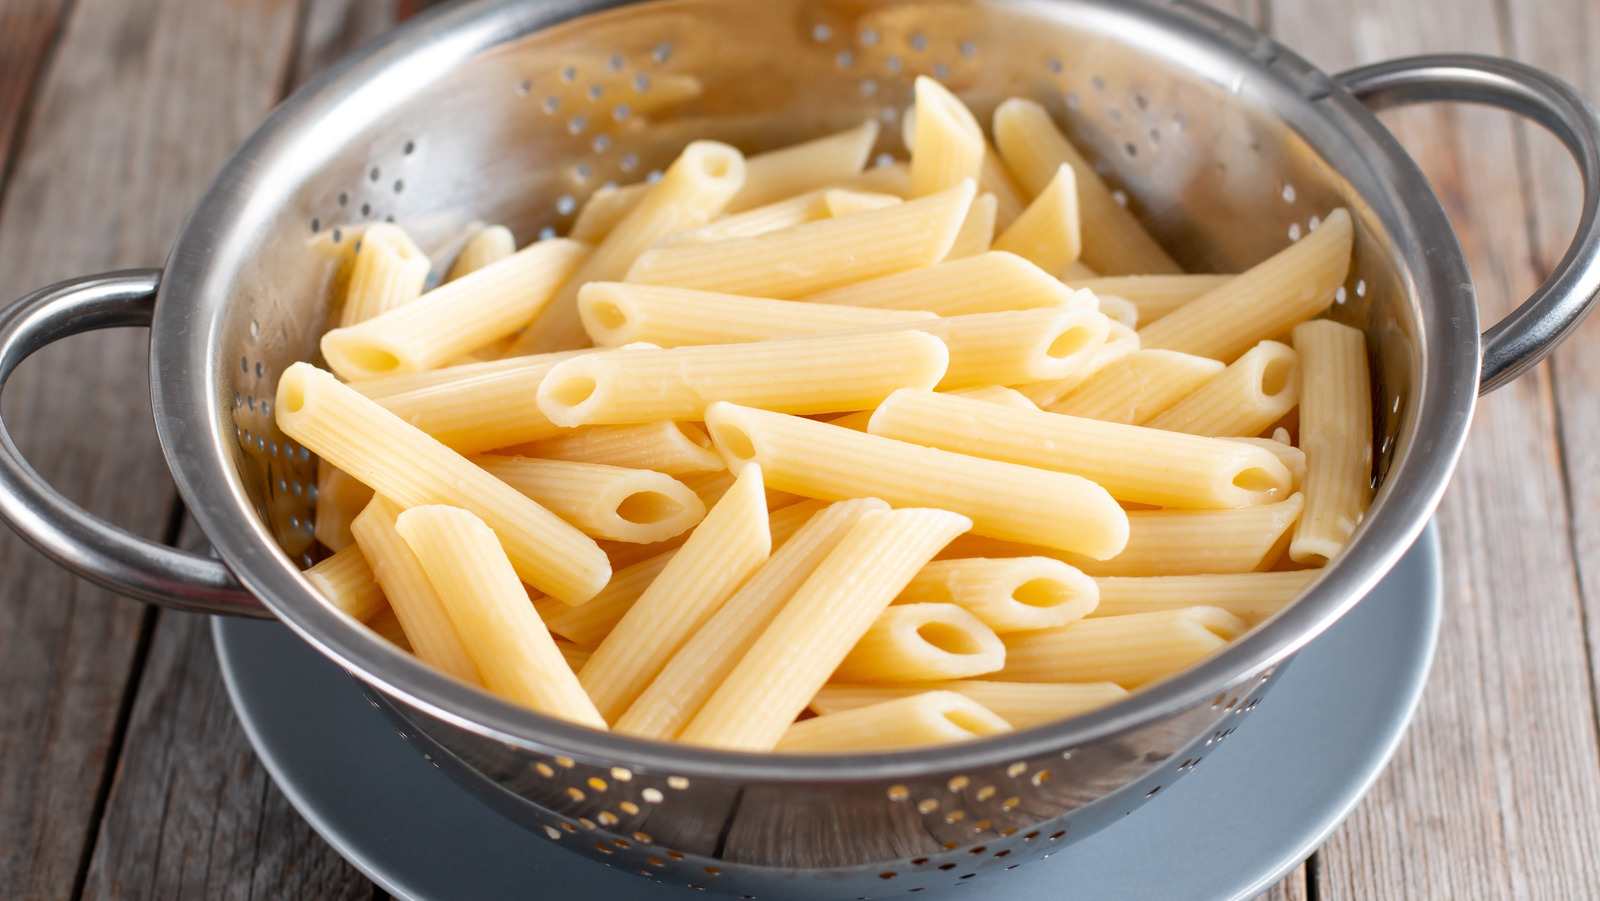 Why Your Colander May Be The Reason Your Pasta Is Overcooked